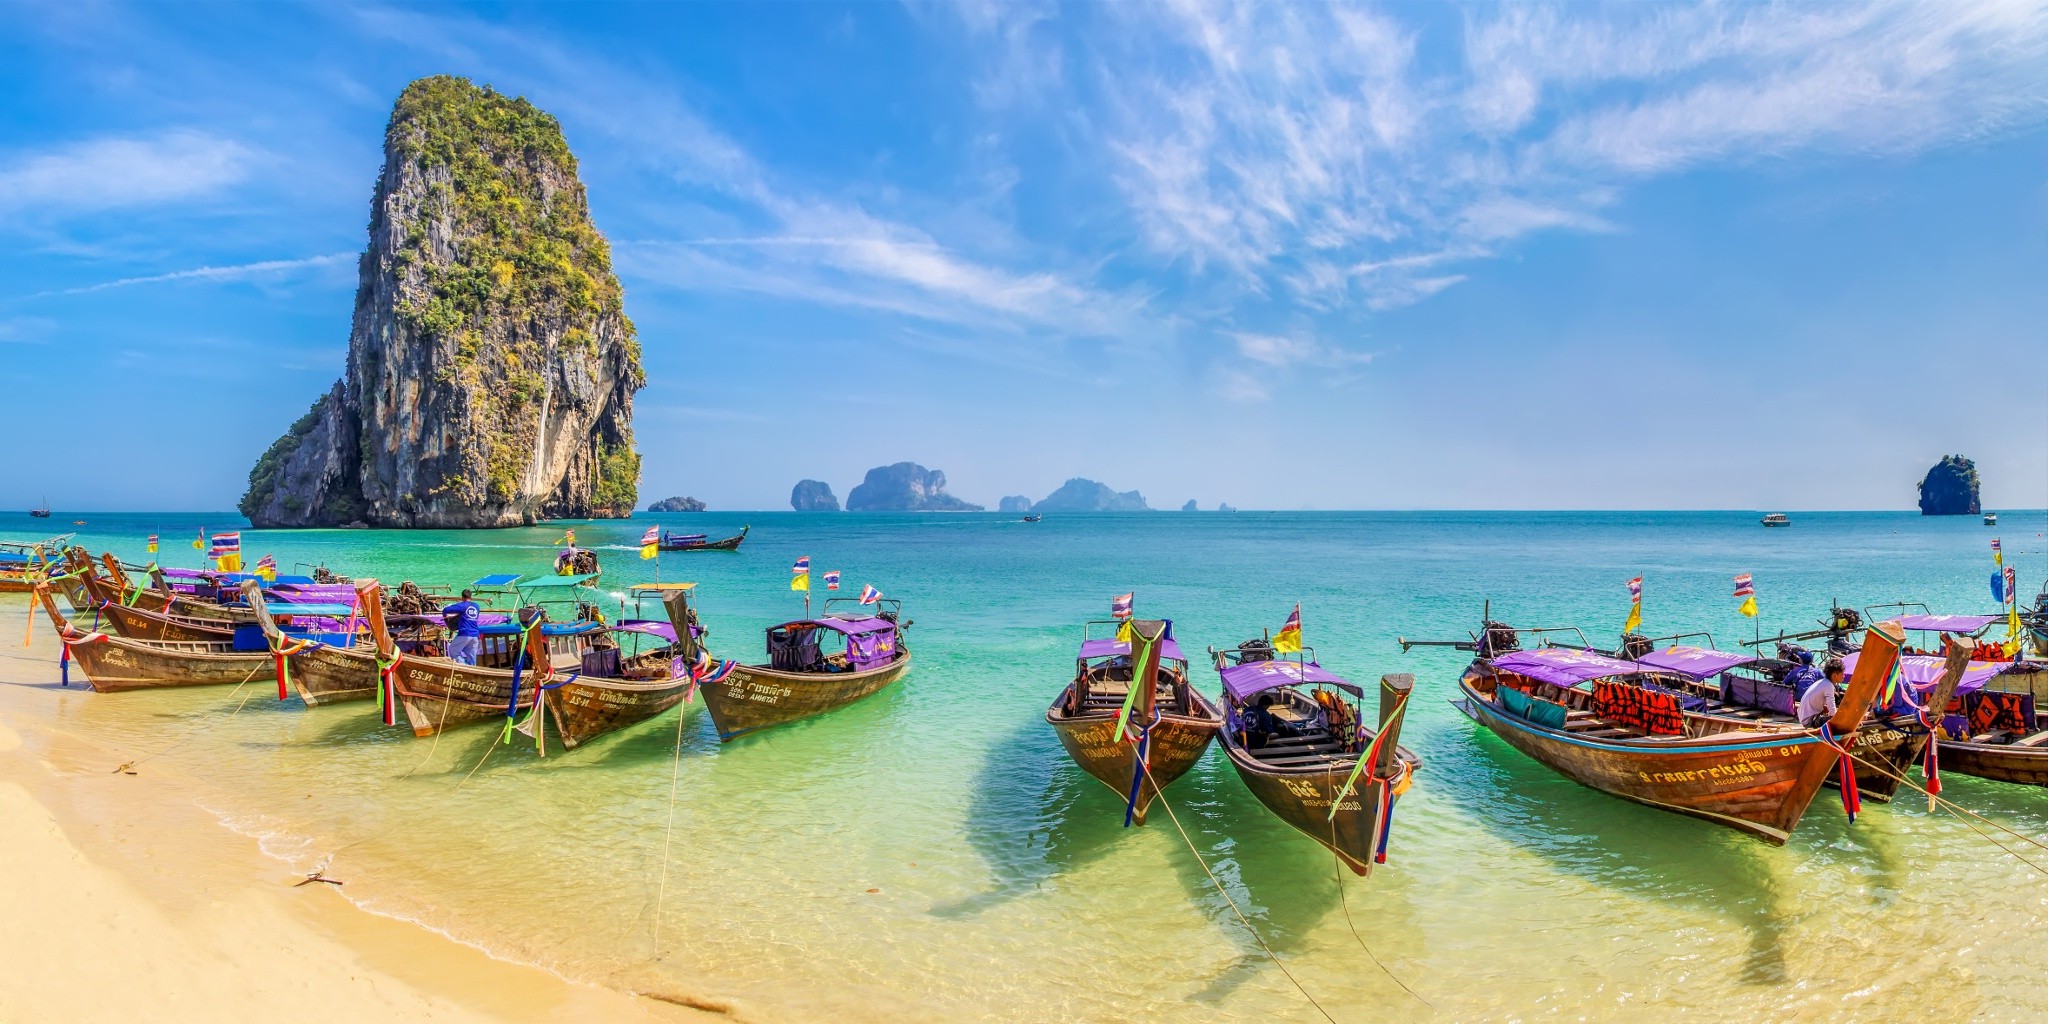 beach, Sand, Boat, Limestone, Island, Sea, Turquoise, Water, Tropical, Vacations, Summer, Nature, Landscape, Thailand Wallpaper